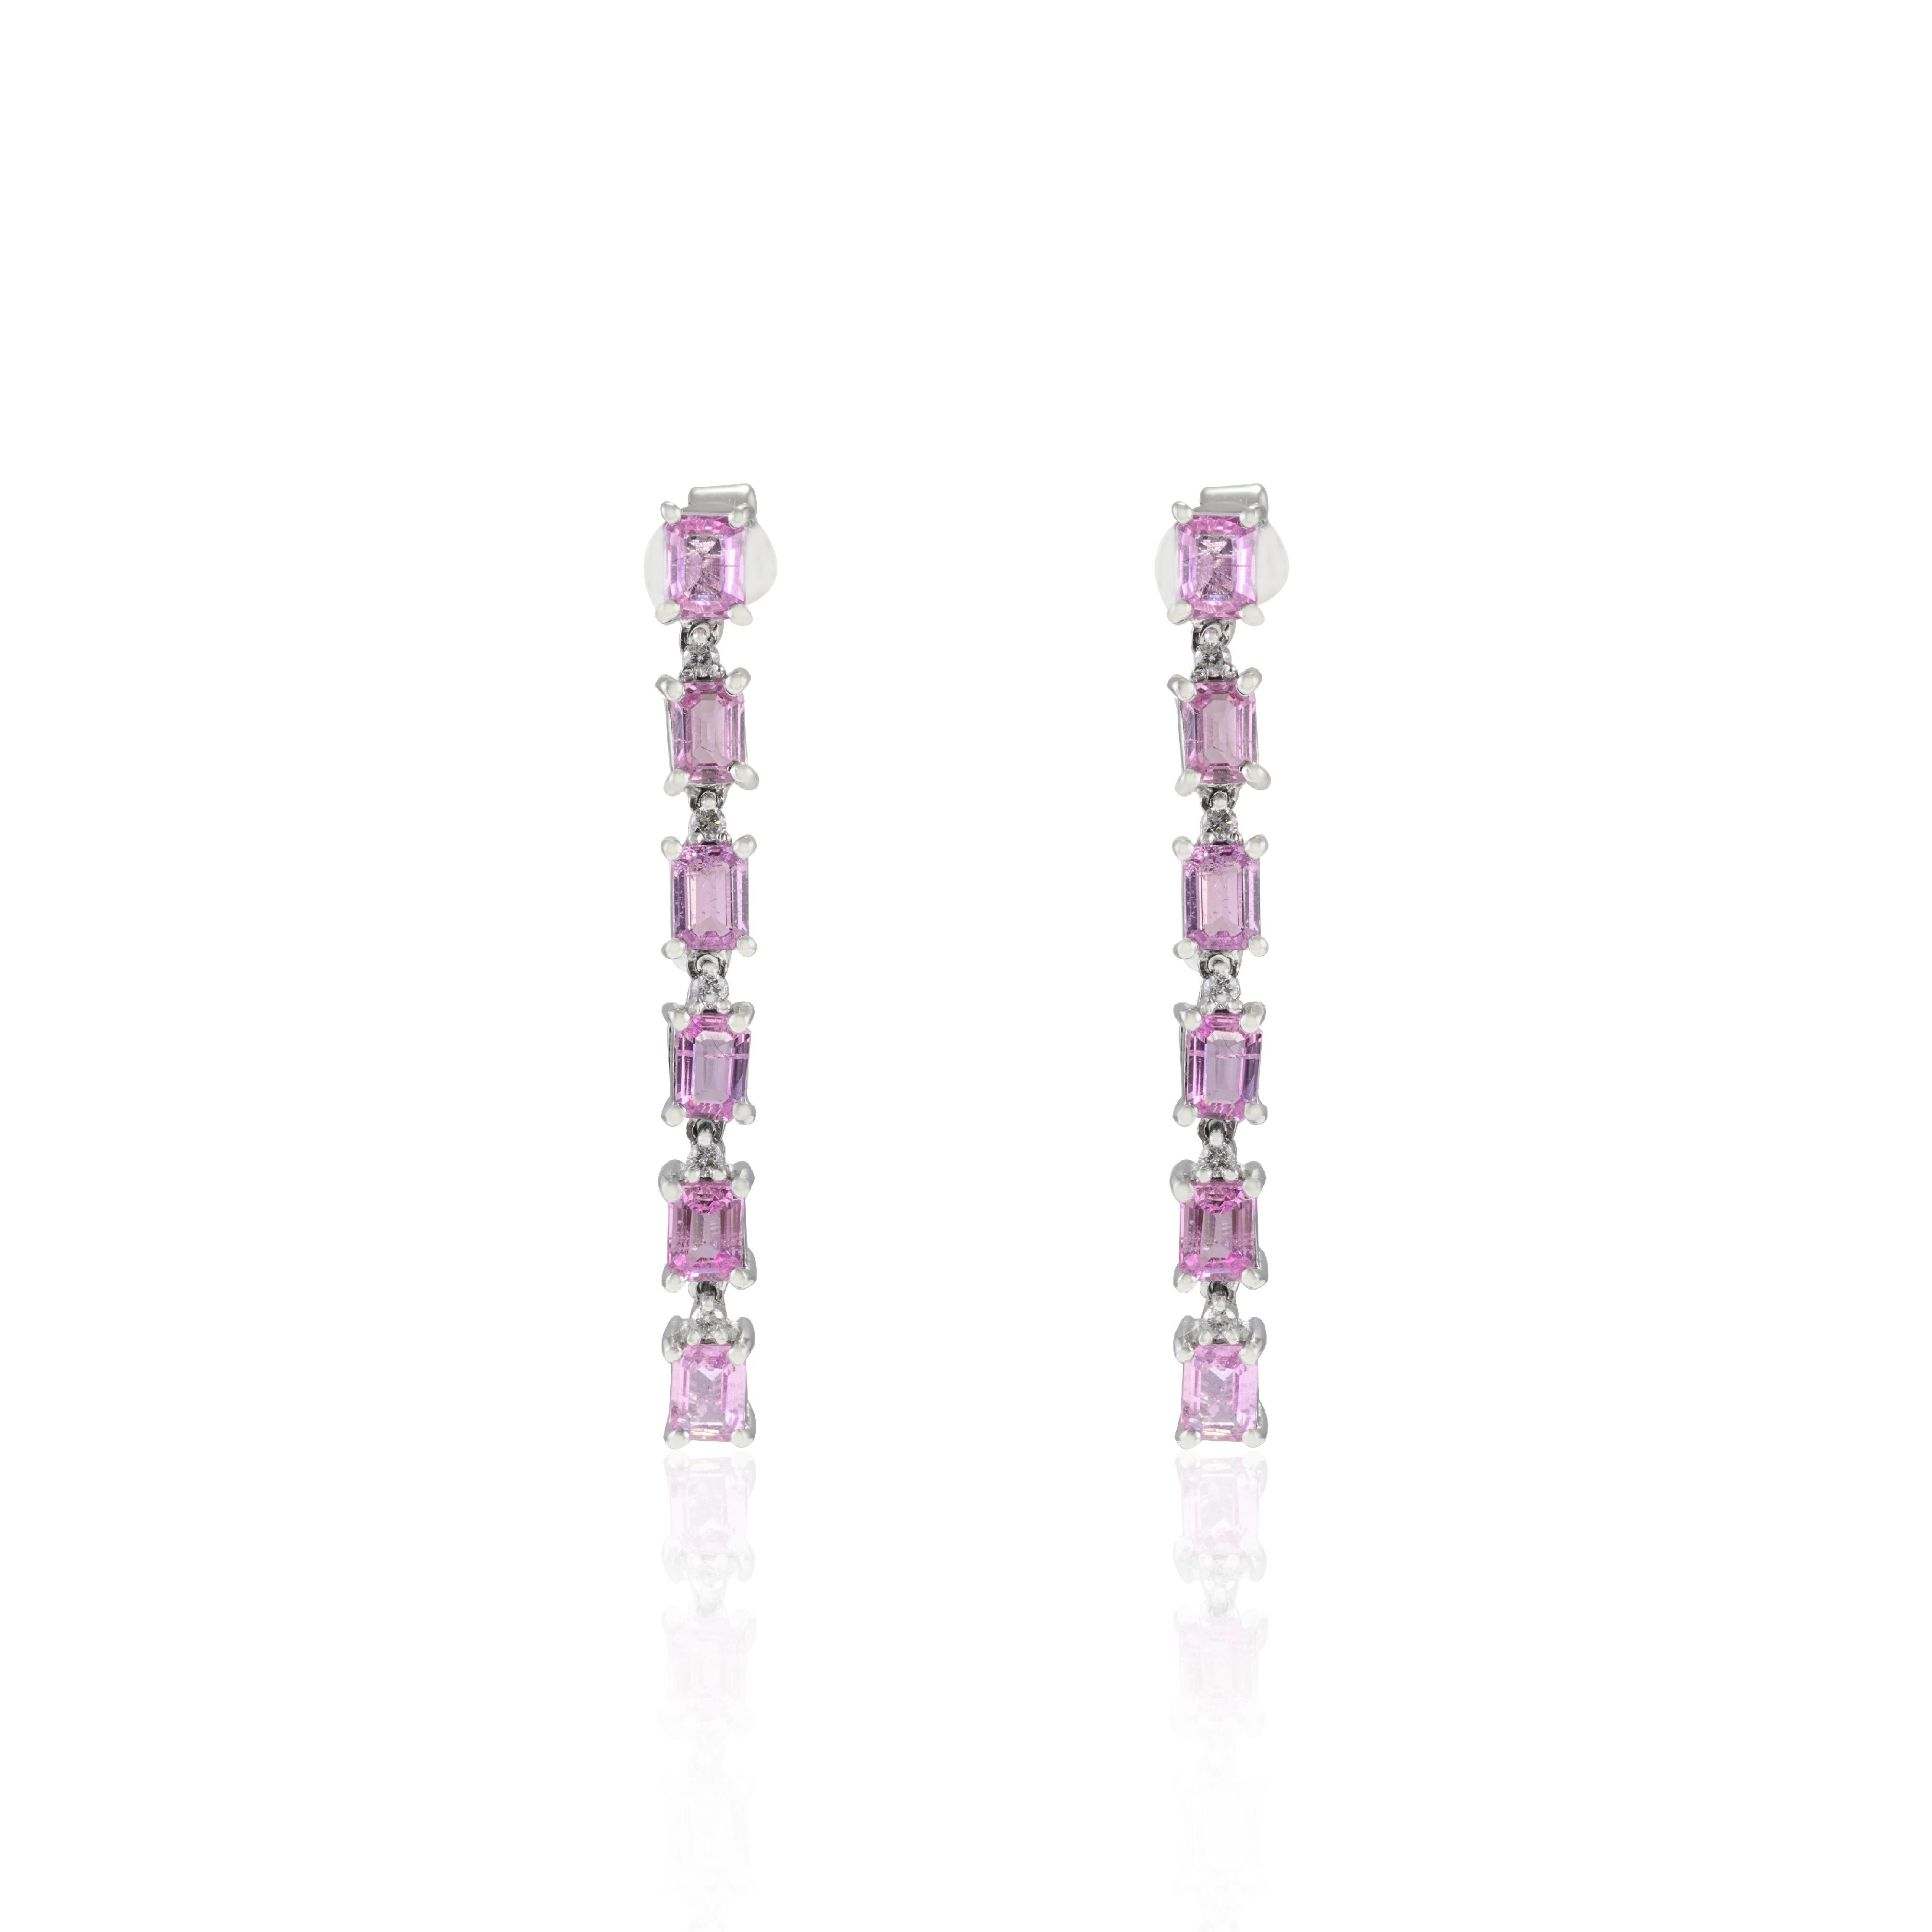 Pink Sapphire and Diamond Cocktail Earrings in 18K Gold to make a statement with your look. You shall need stud earrings to make a statement with your look. These earrings create a sparkling, luxurious look featuring octagon cut pink